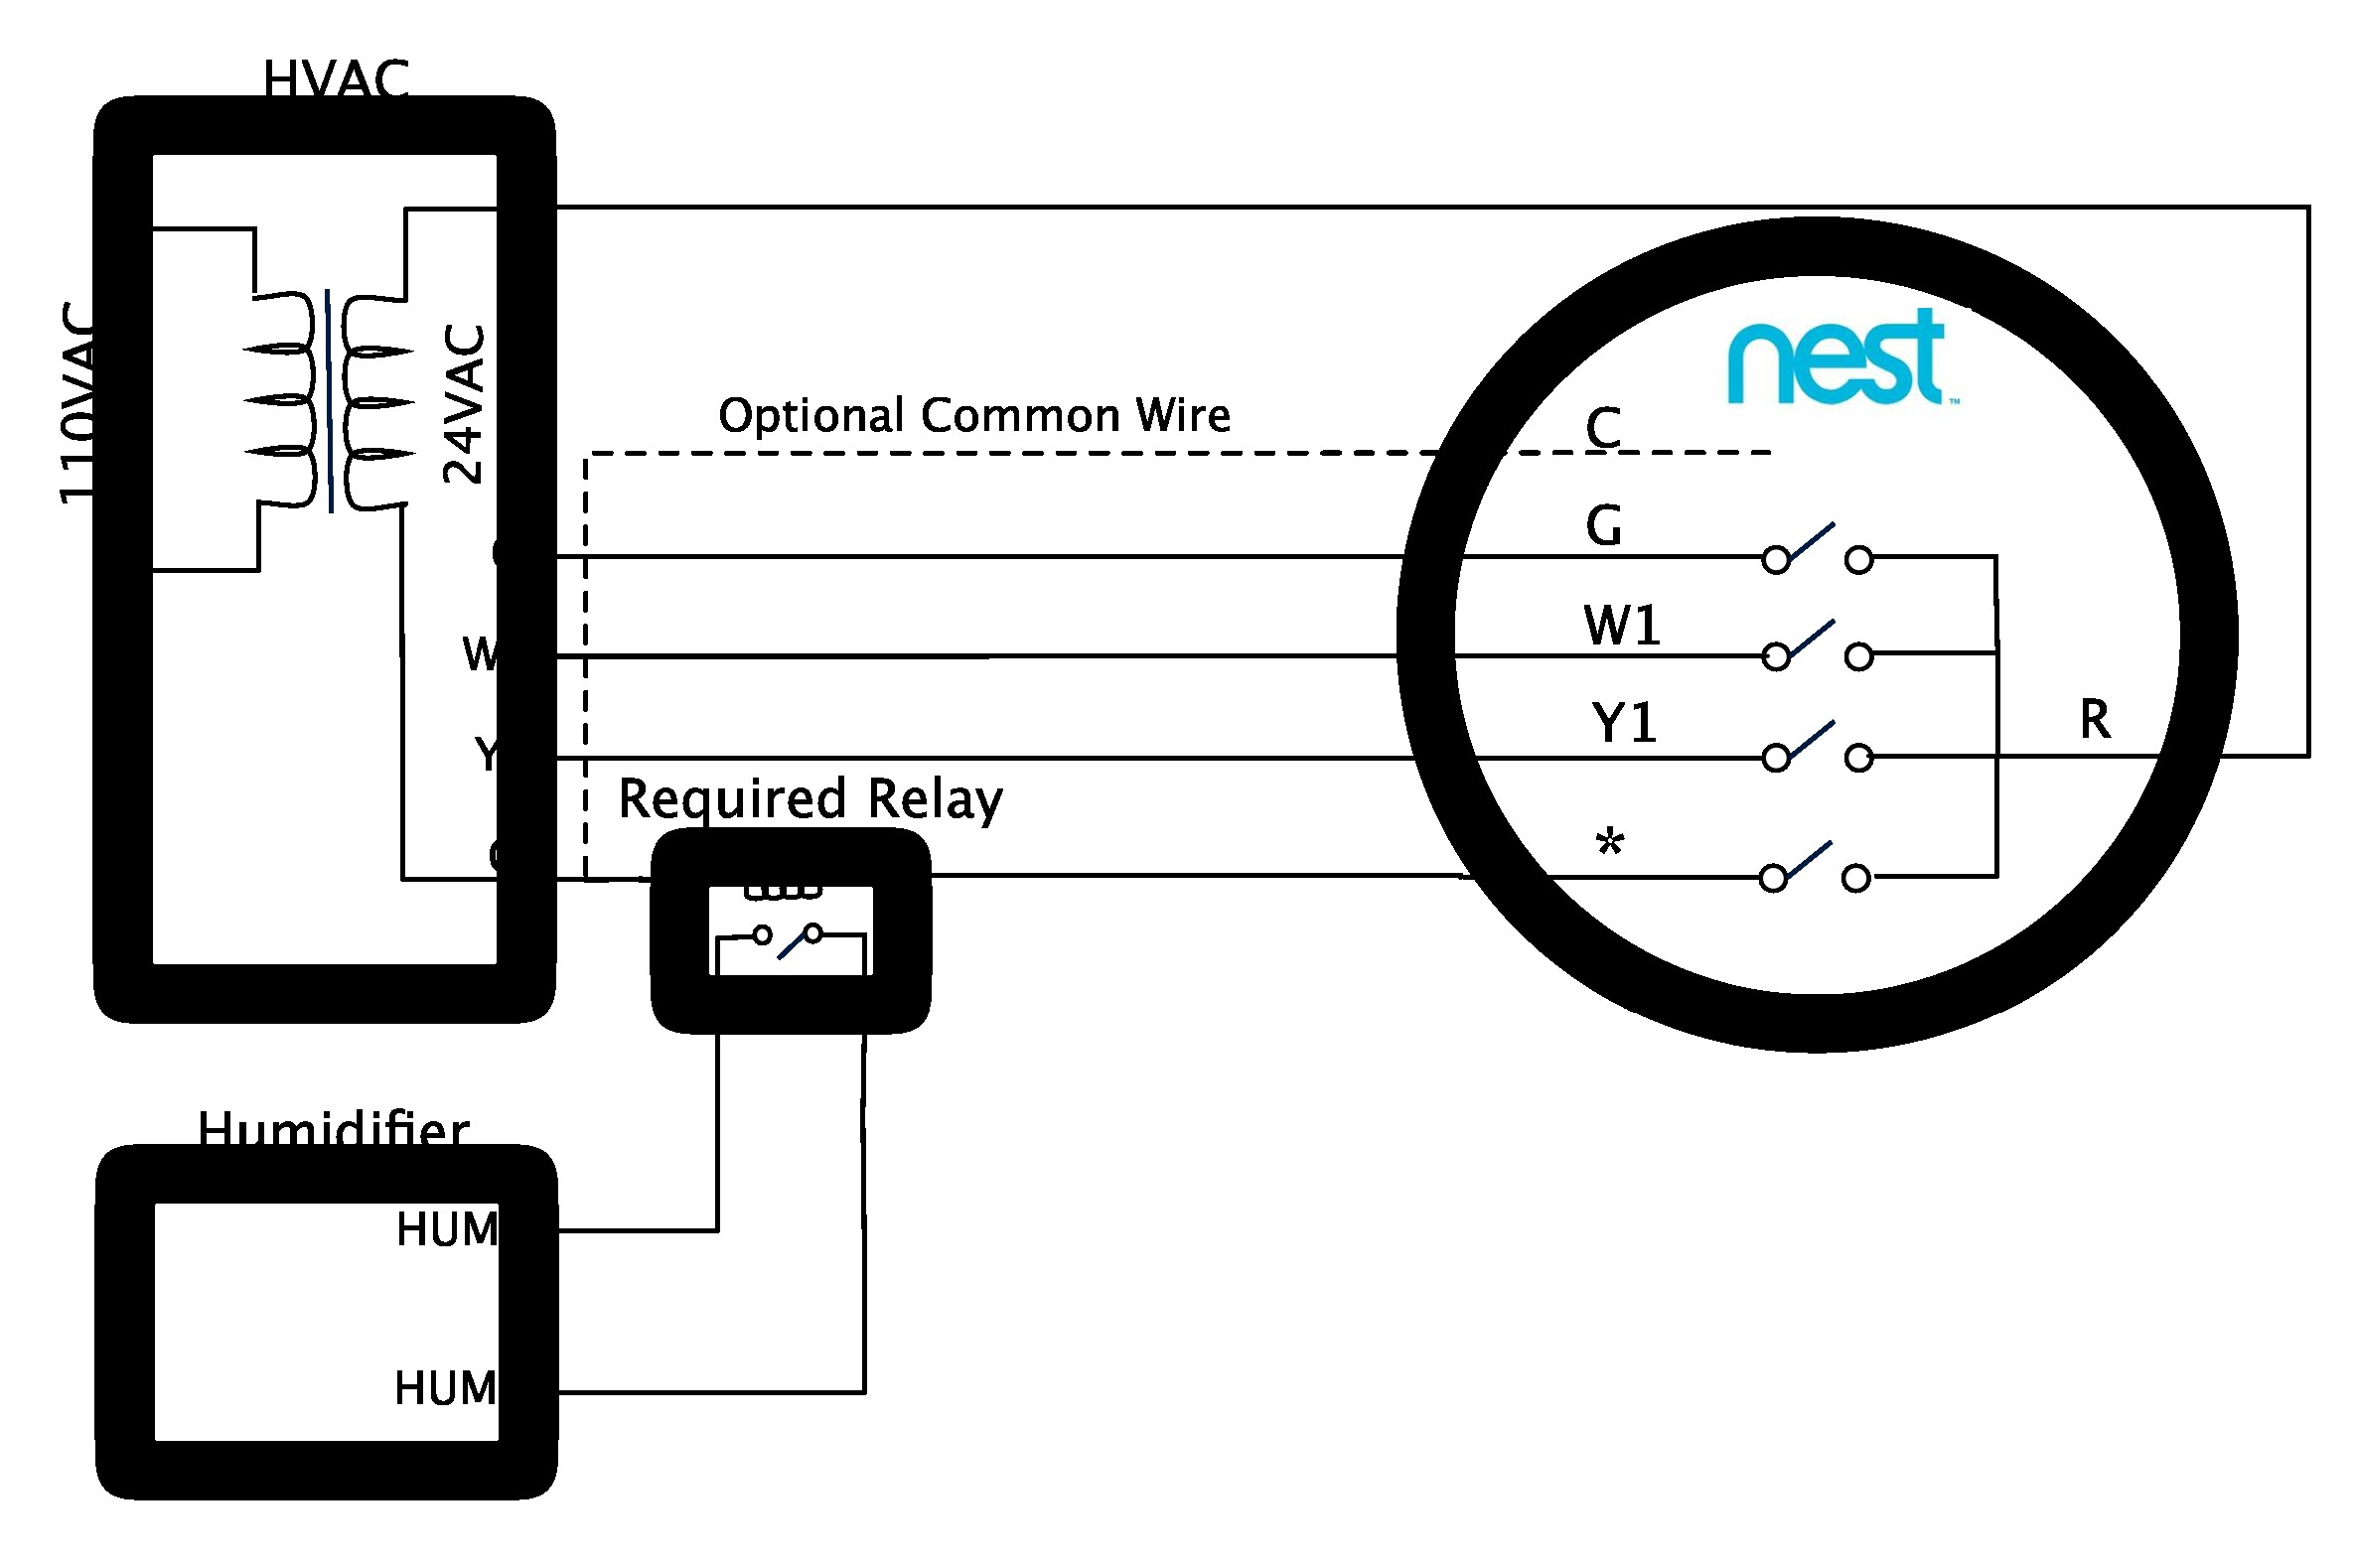 nest 2 and honeywell he300 wiringsupport assets nest image hum 2 wire png